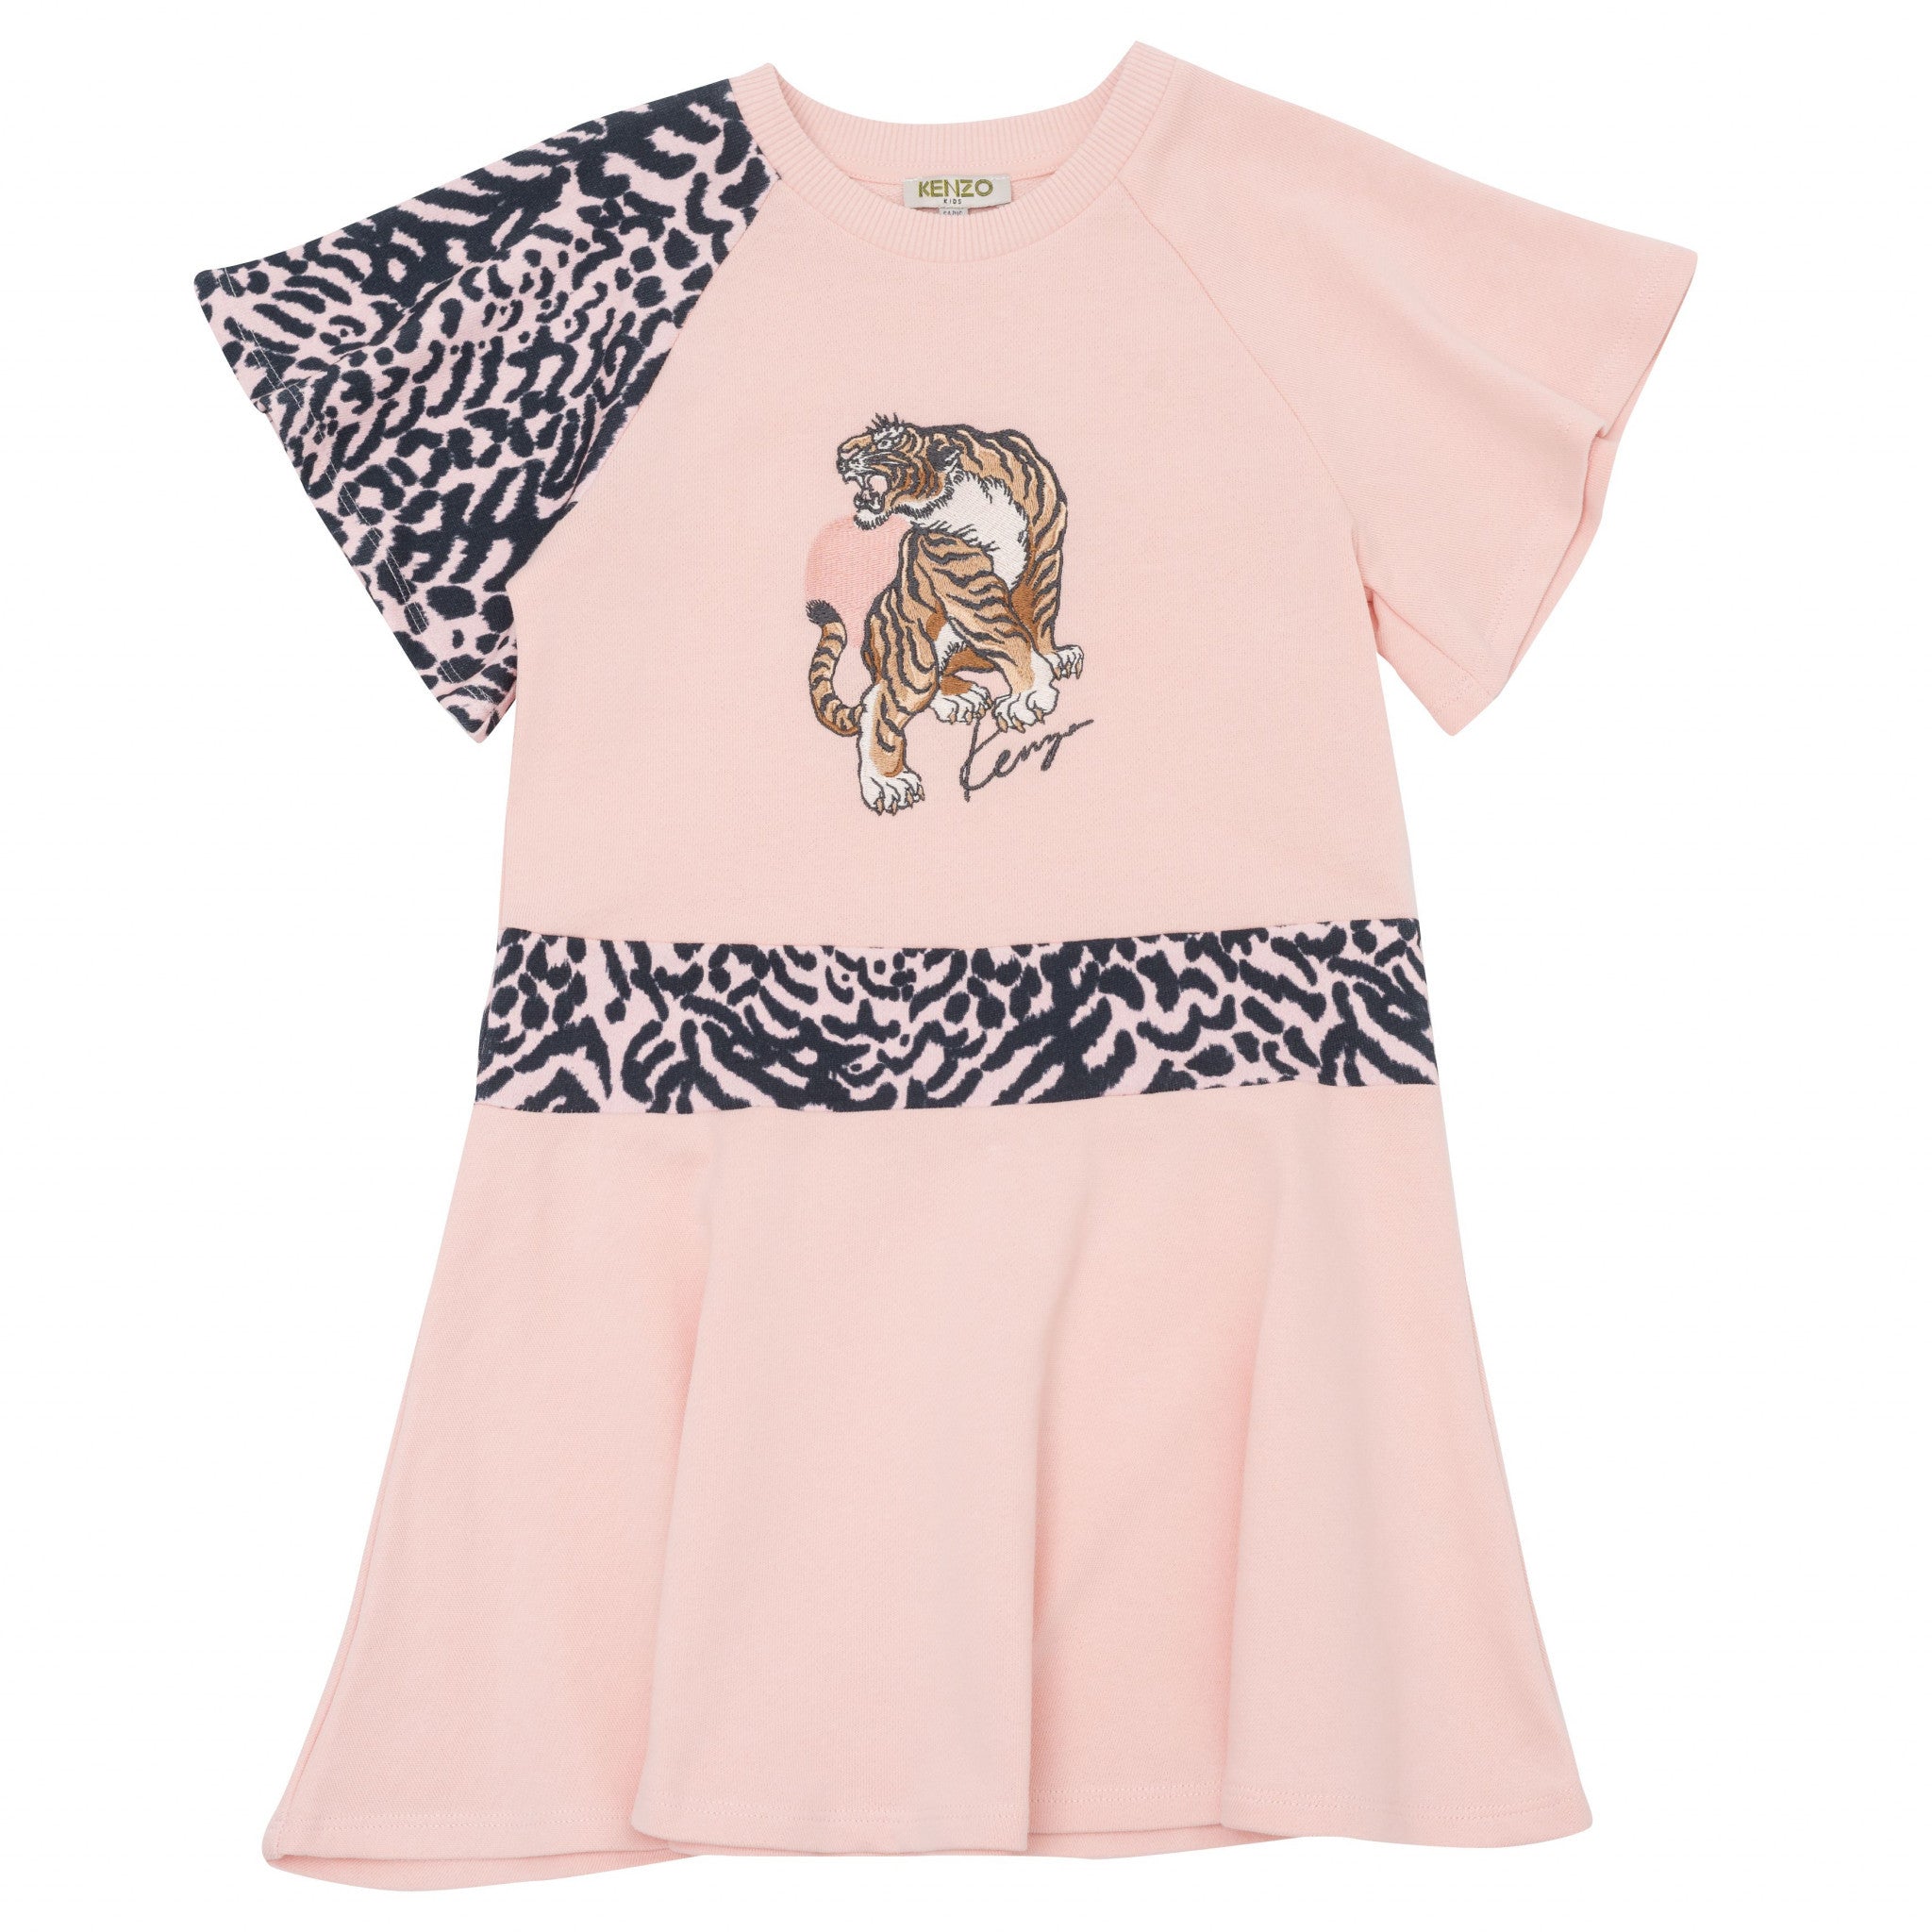 Buttlerfly sleeve cotton pink dress for girls, with an embroidered tiger and logo print on the front